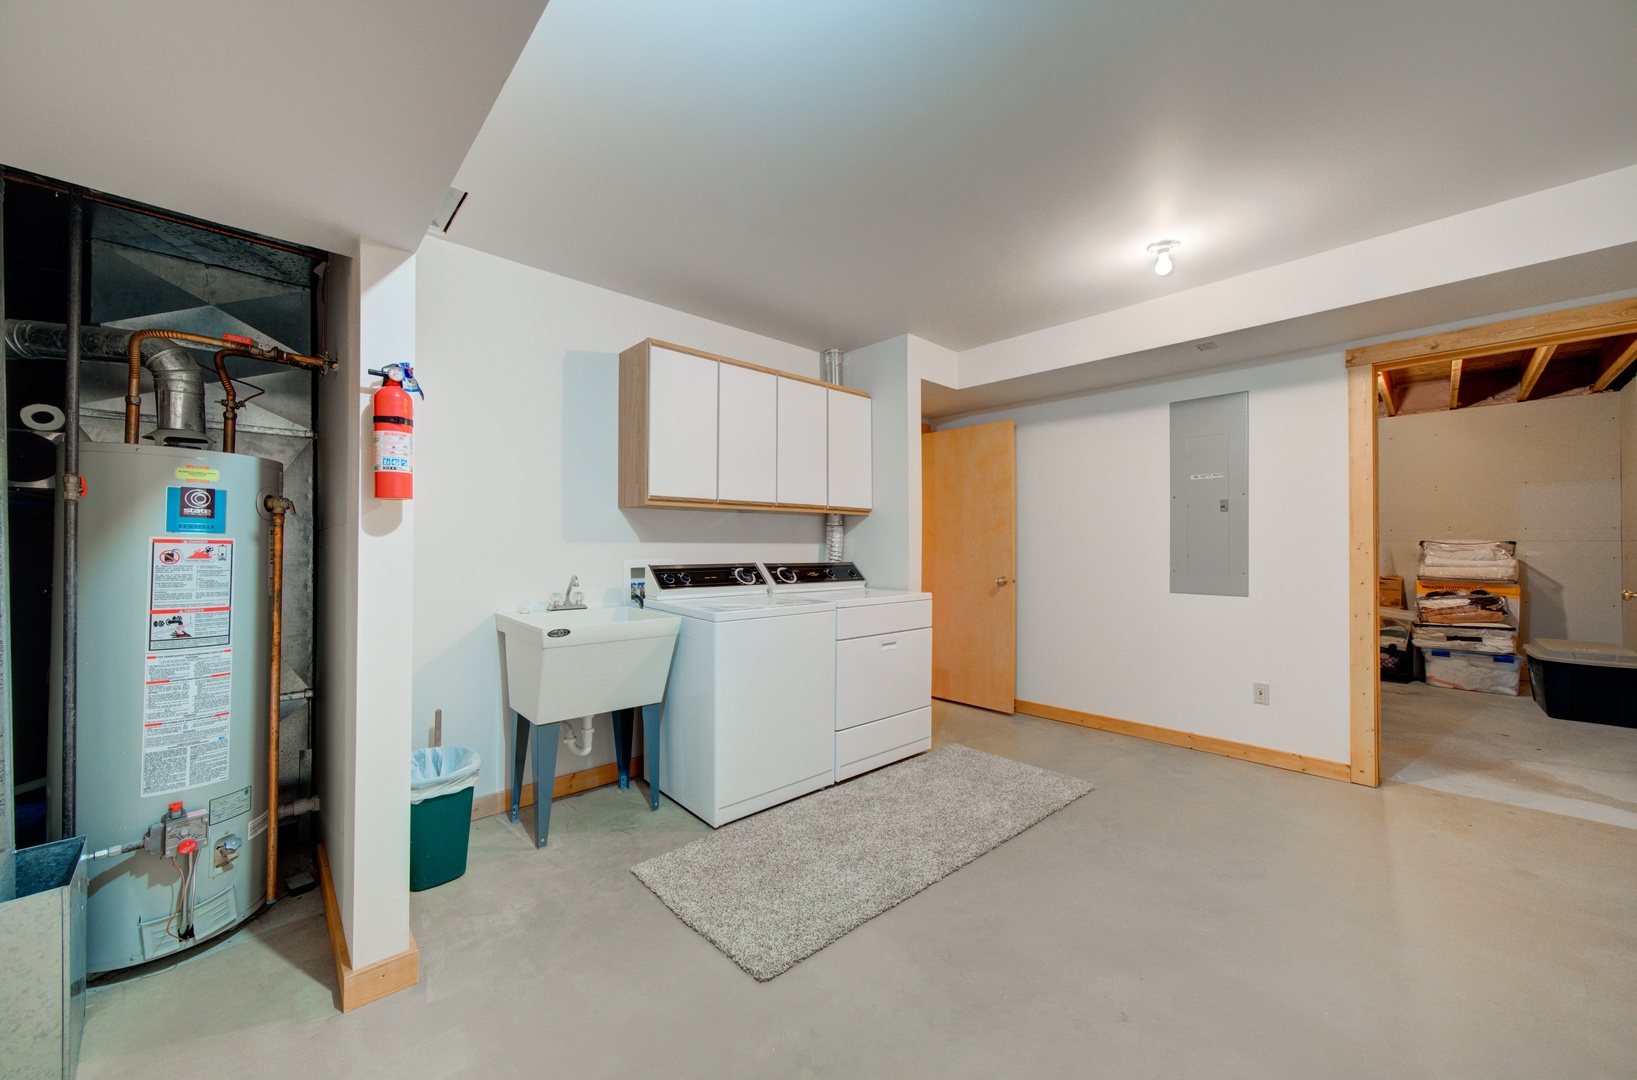 Bozeman Vacation Rentals, The Canyon Lookout - Full laundry facilities